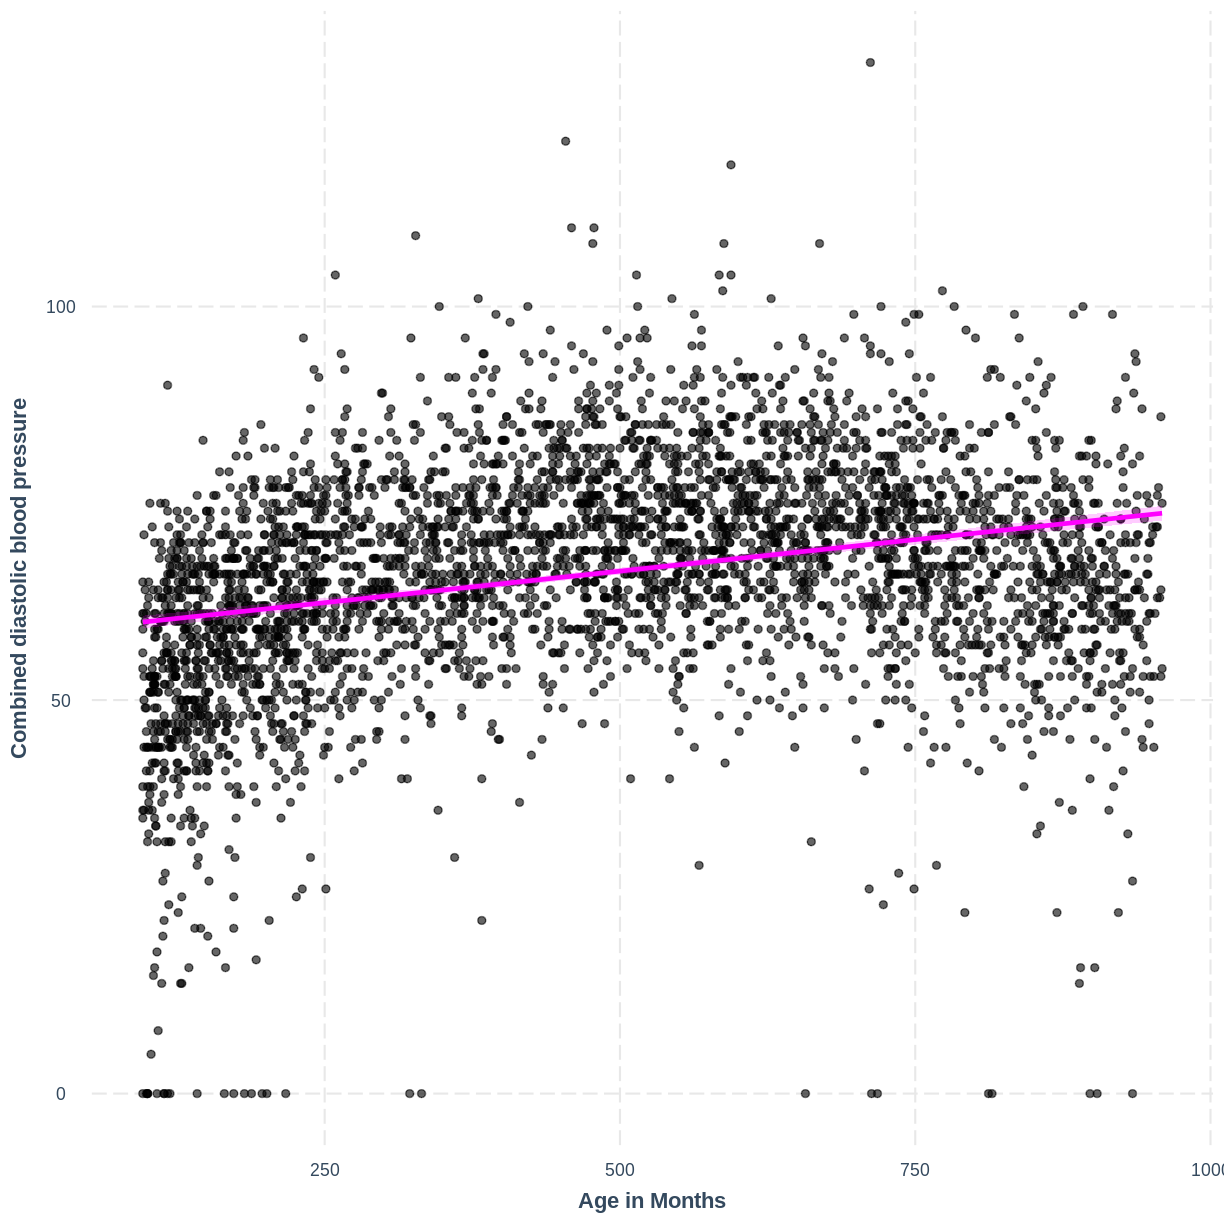 Linear regression models and tests for age and breast size as